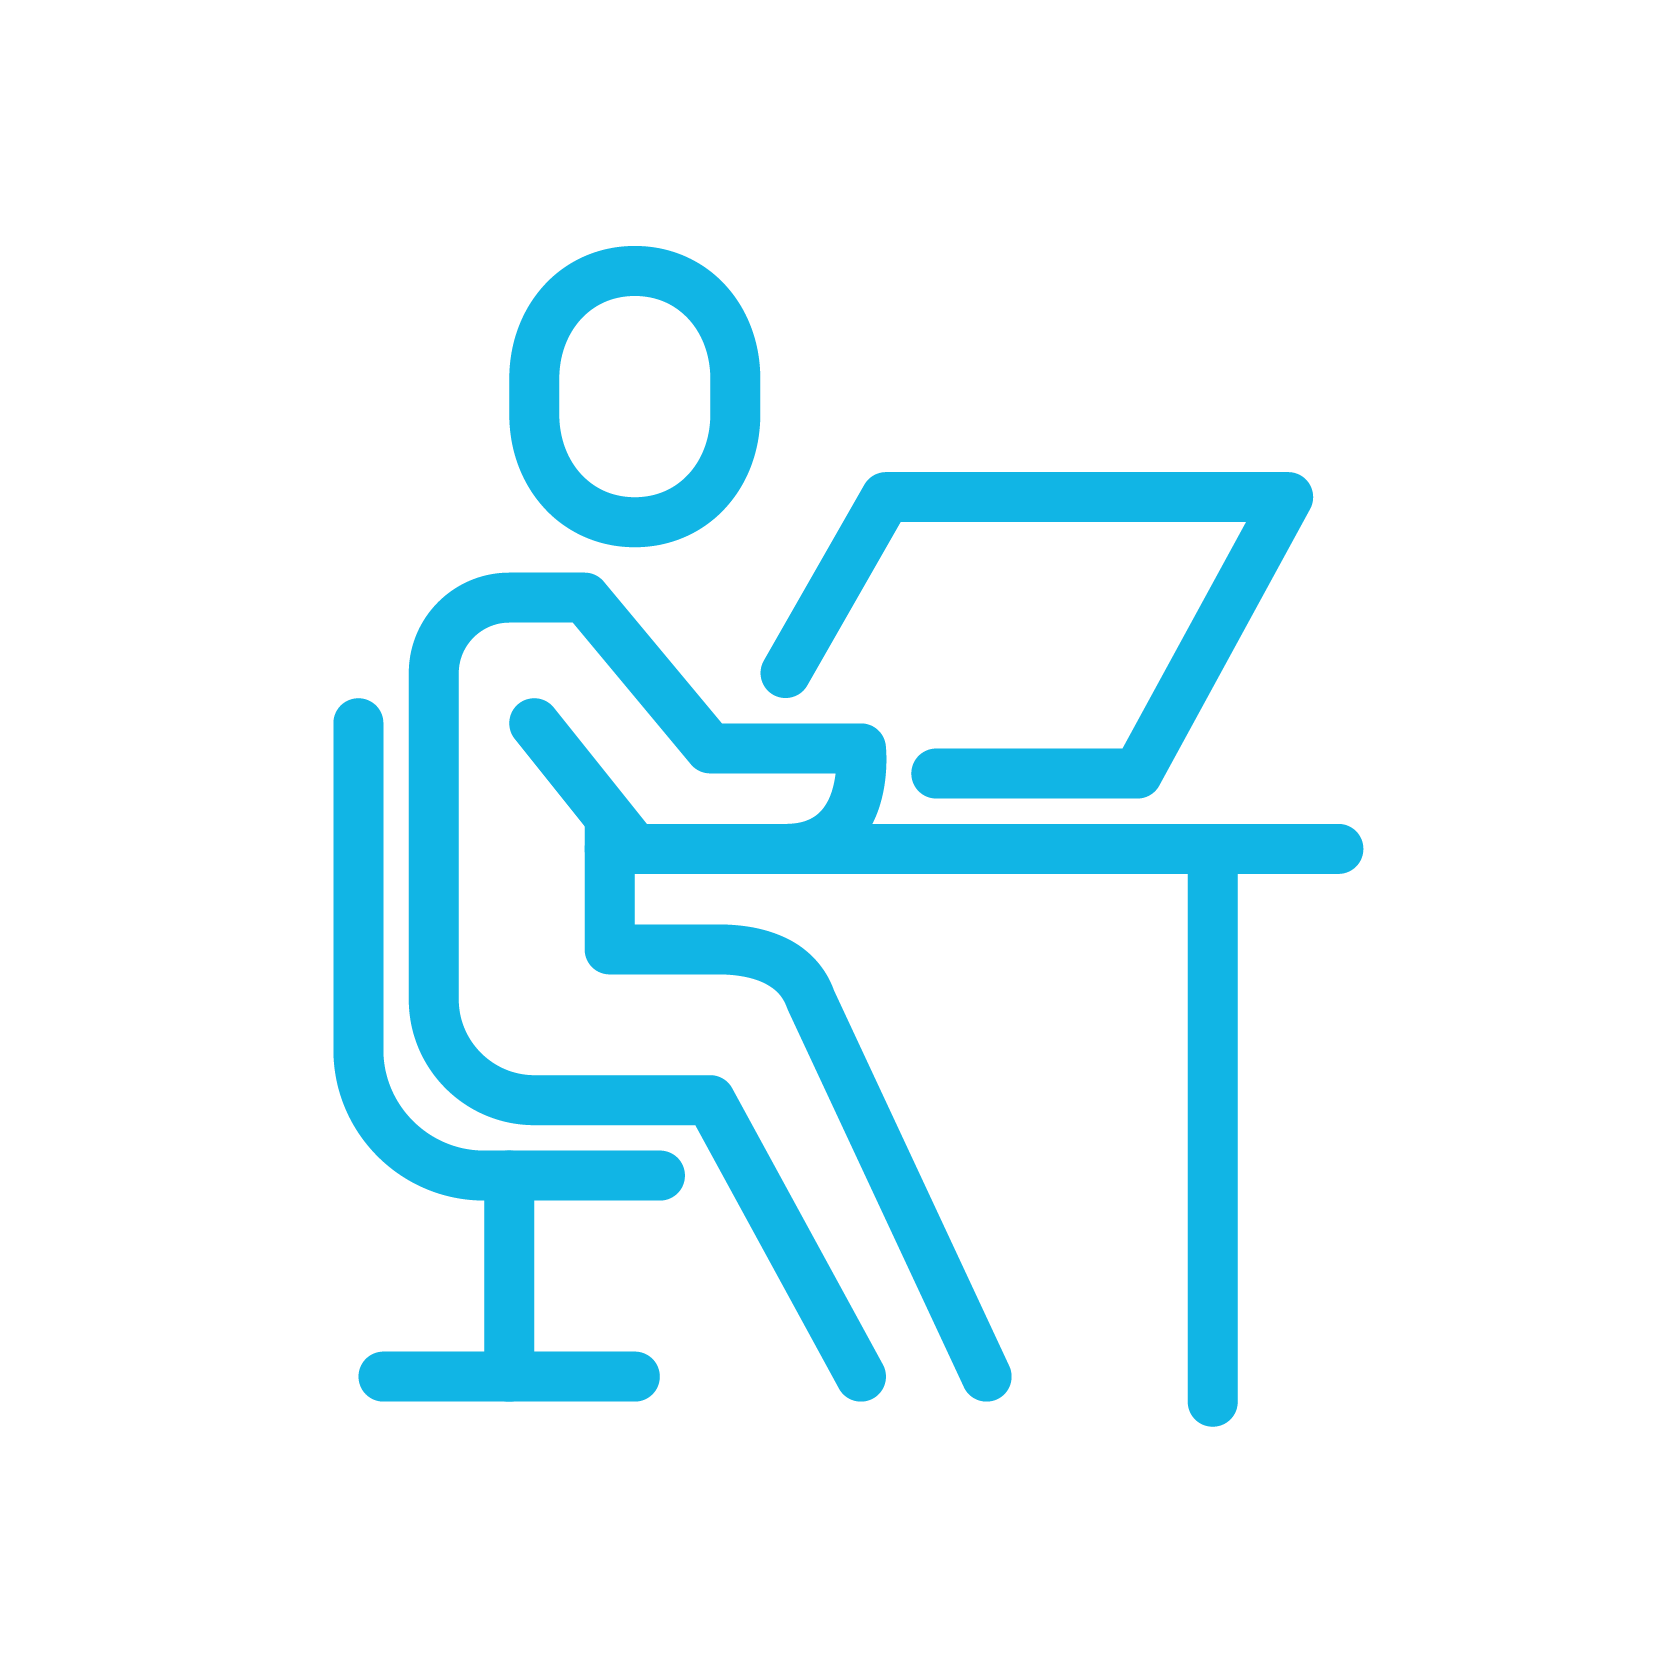 Comprehensive Training - This is an icon of a person sitting at a desk with a computer in front of them.  This represents the fact that HammerTech offers in-person and/or virtual training options for a smooth onboarding process.